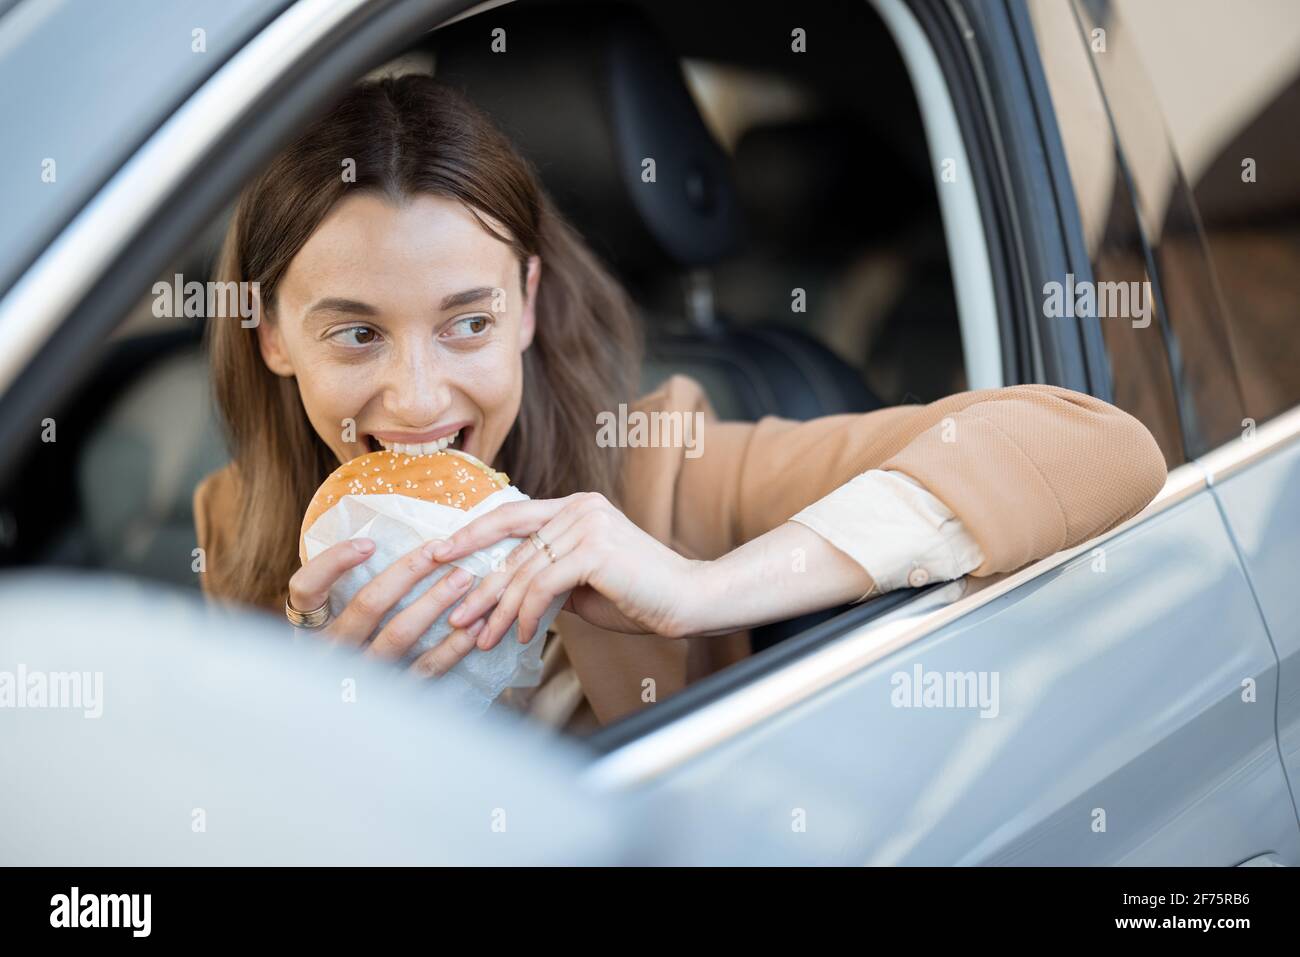 Happy woman eating a burger in the car. Bites a sandwich. Have unhealthy fast food snack. Food to go. Hungry and busy concept. Stock Photo